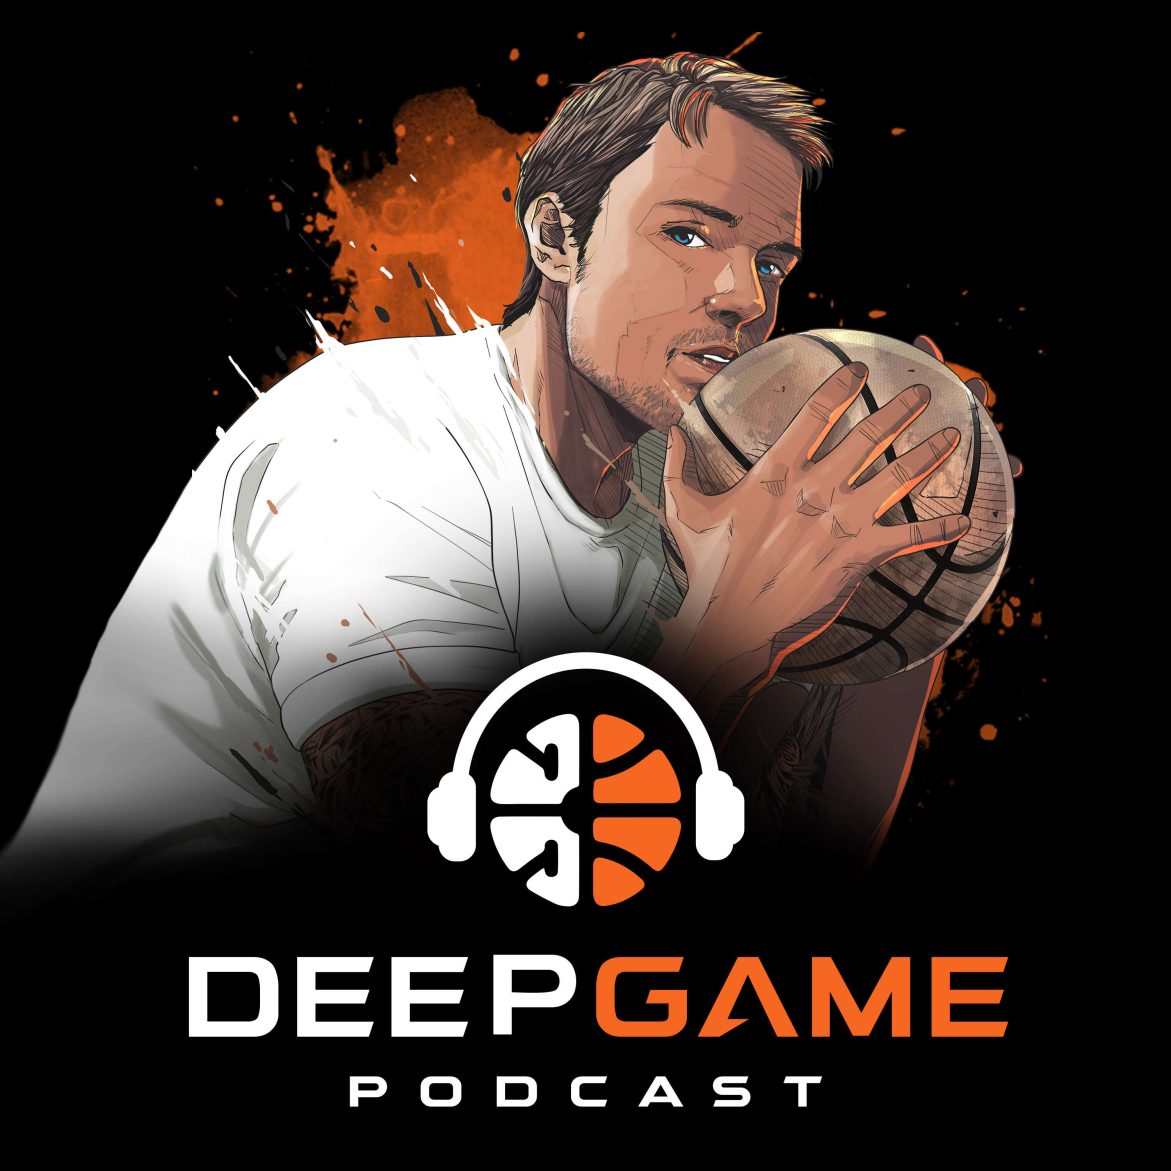 Black Podcasting - The Deep Game Masterclass: Finally Available On Podcast!